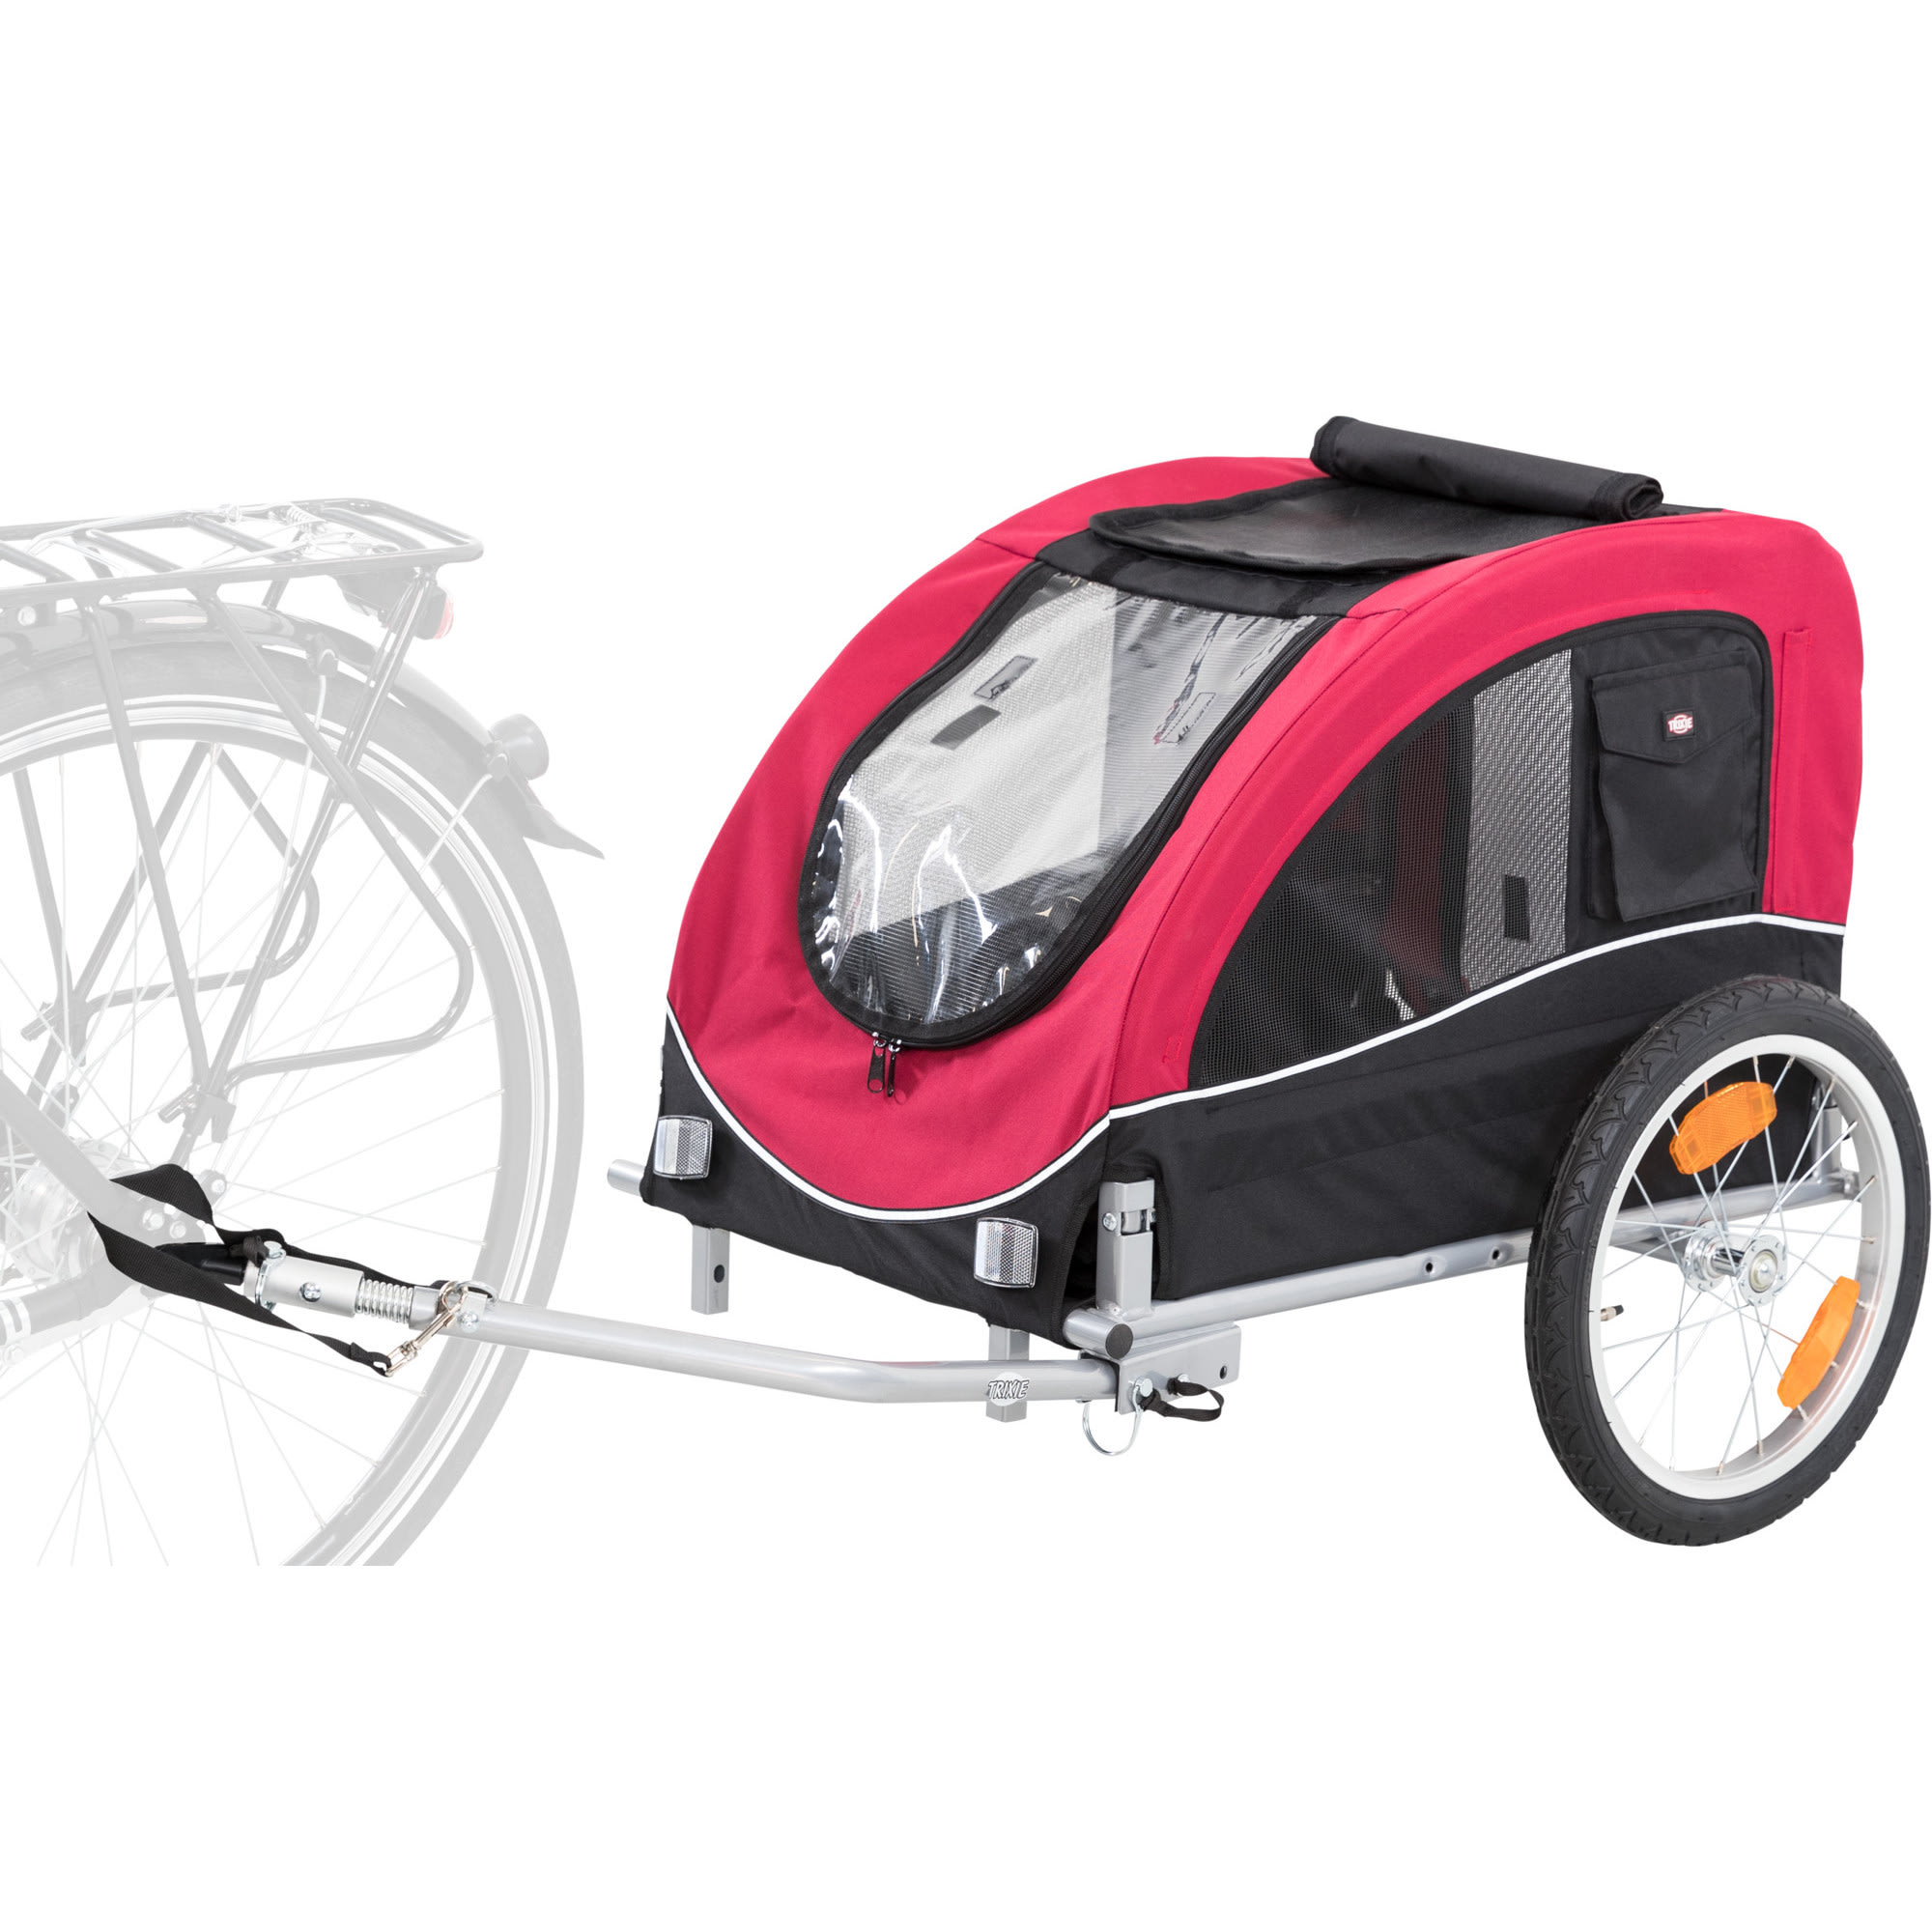 Trixie 2-in-1 Dog Bike Trailer and Pet Stroller, Large